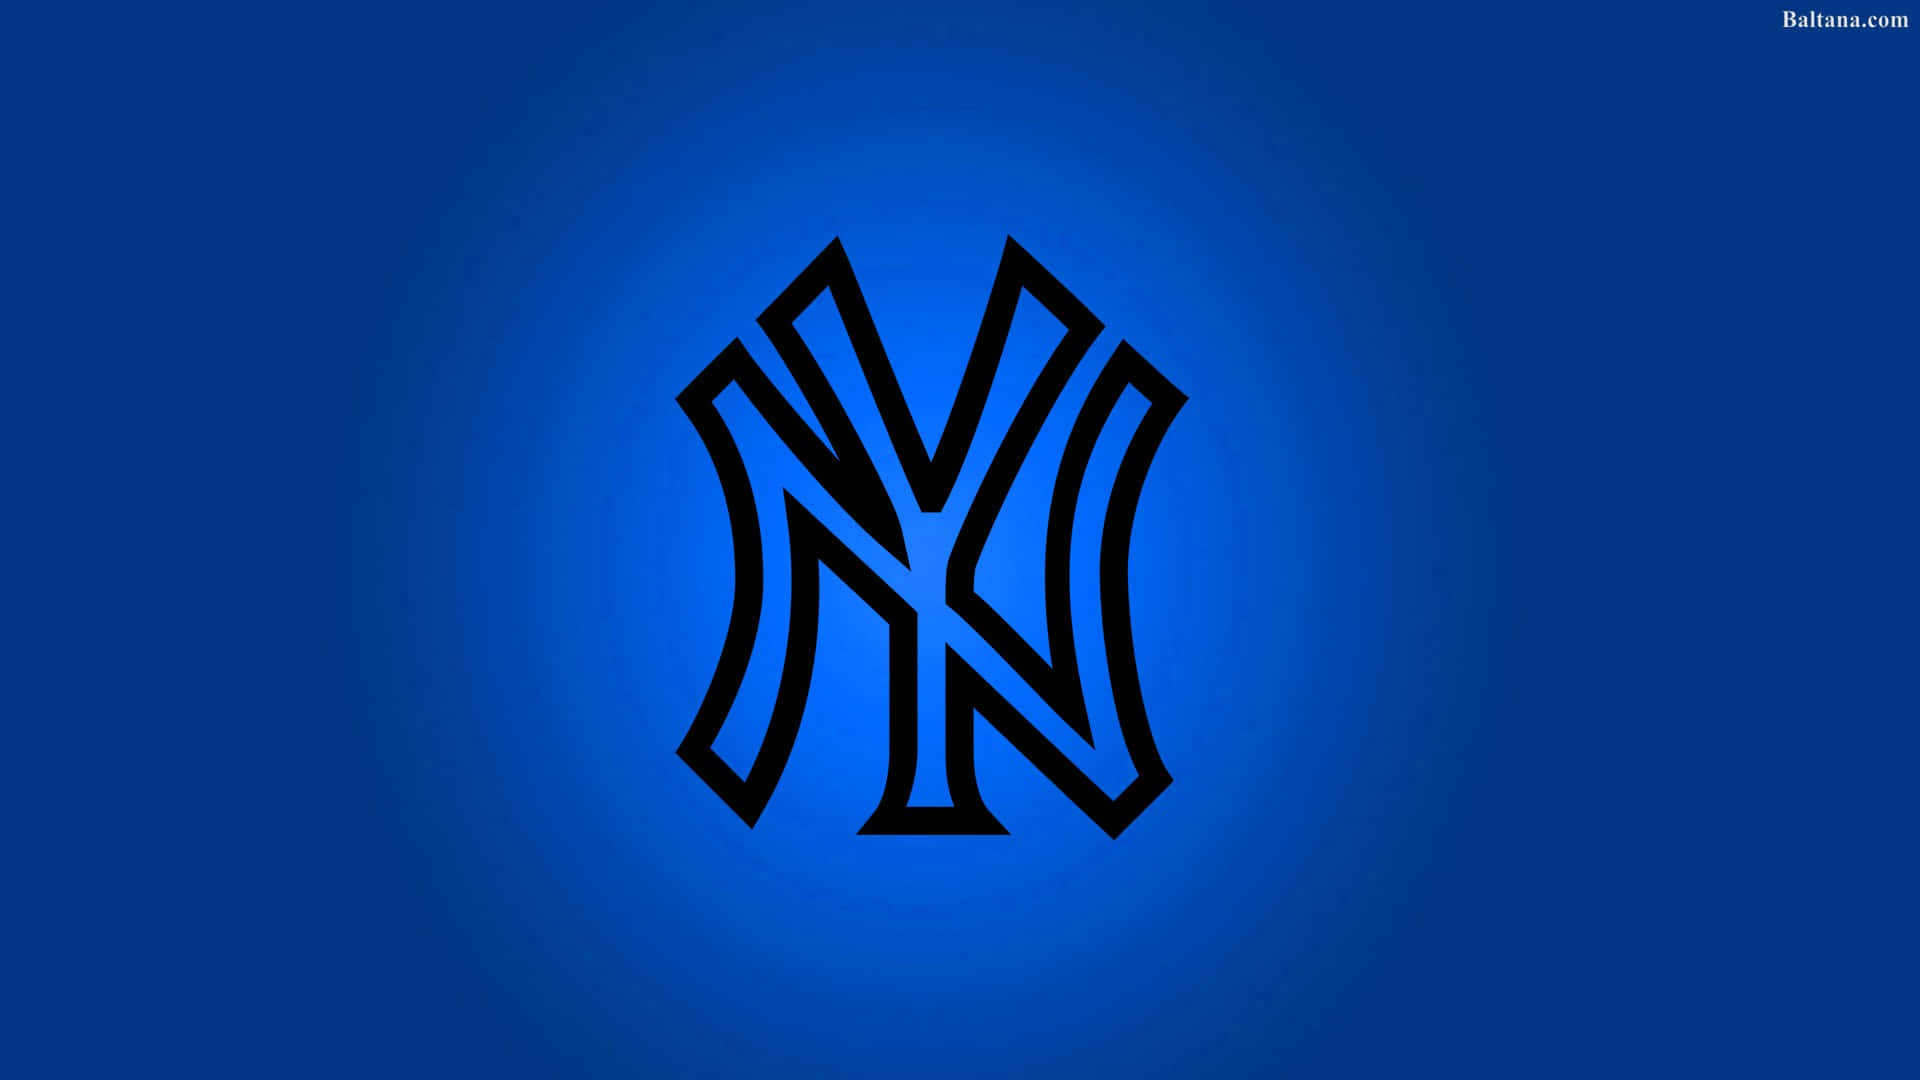 The New York Yankees take the field for a home game Wallpaper